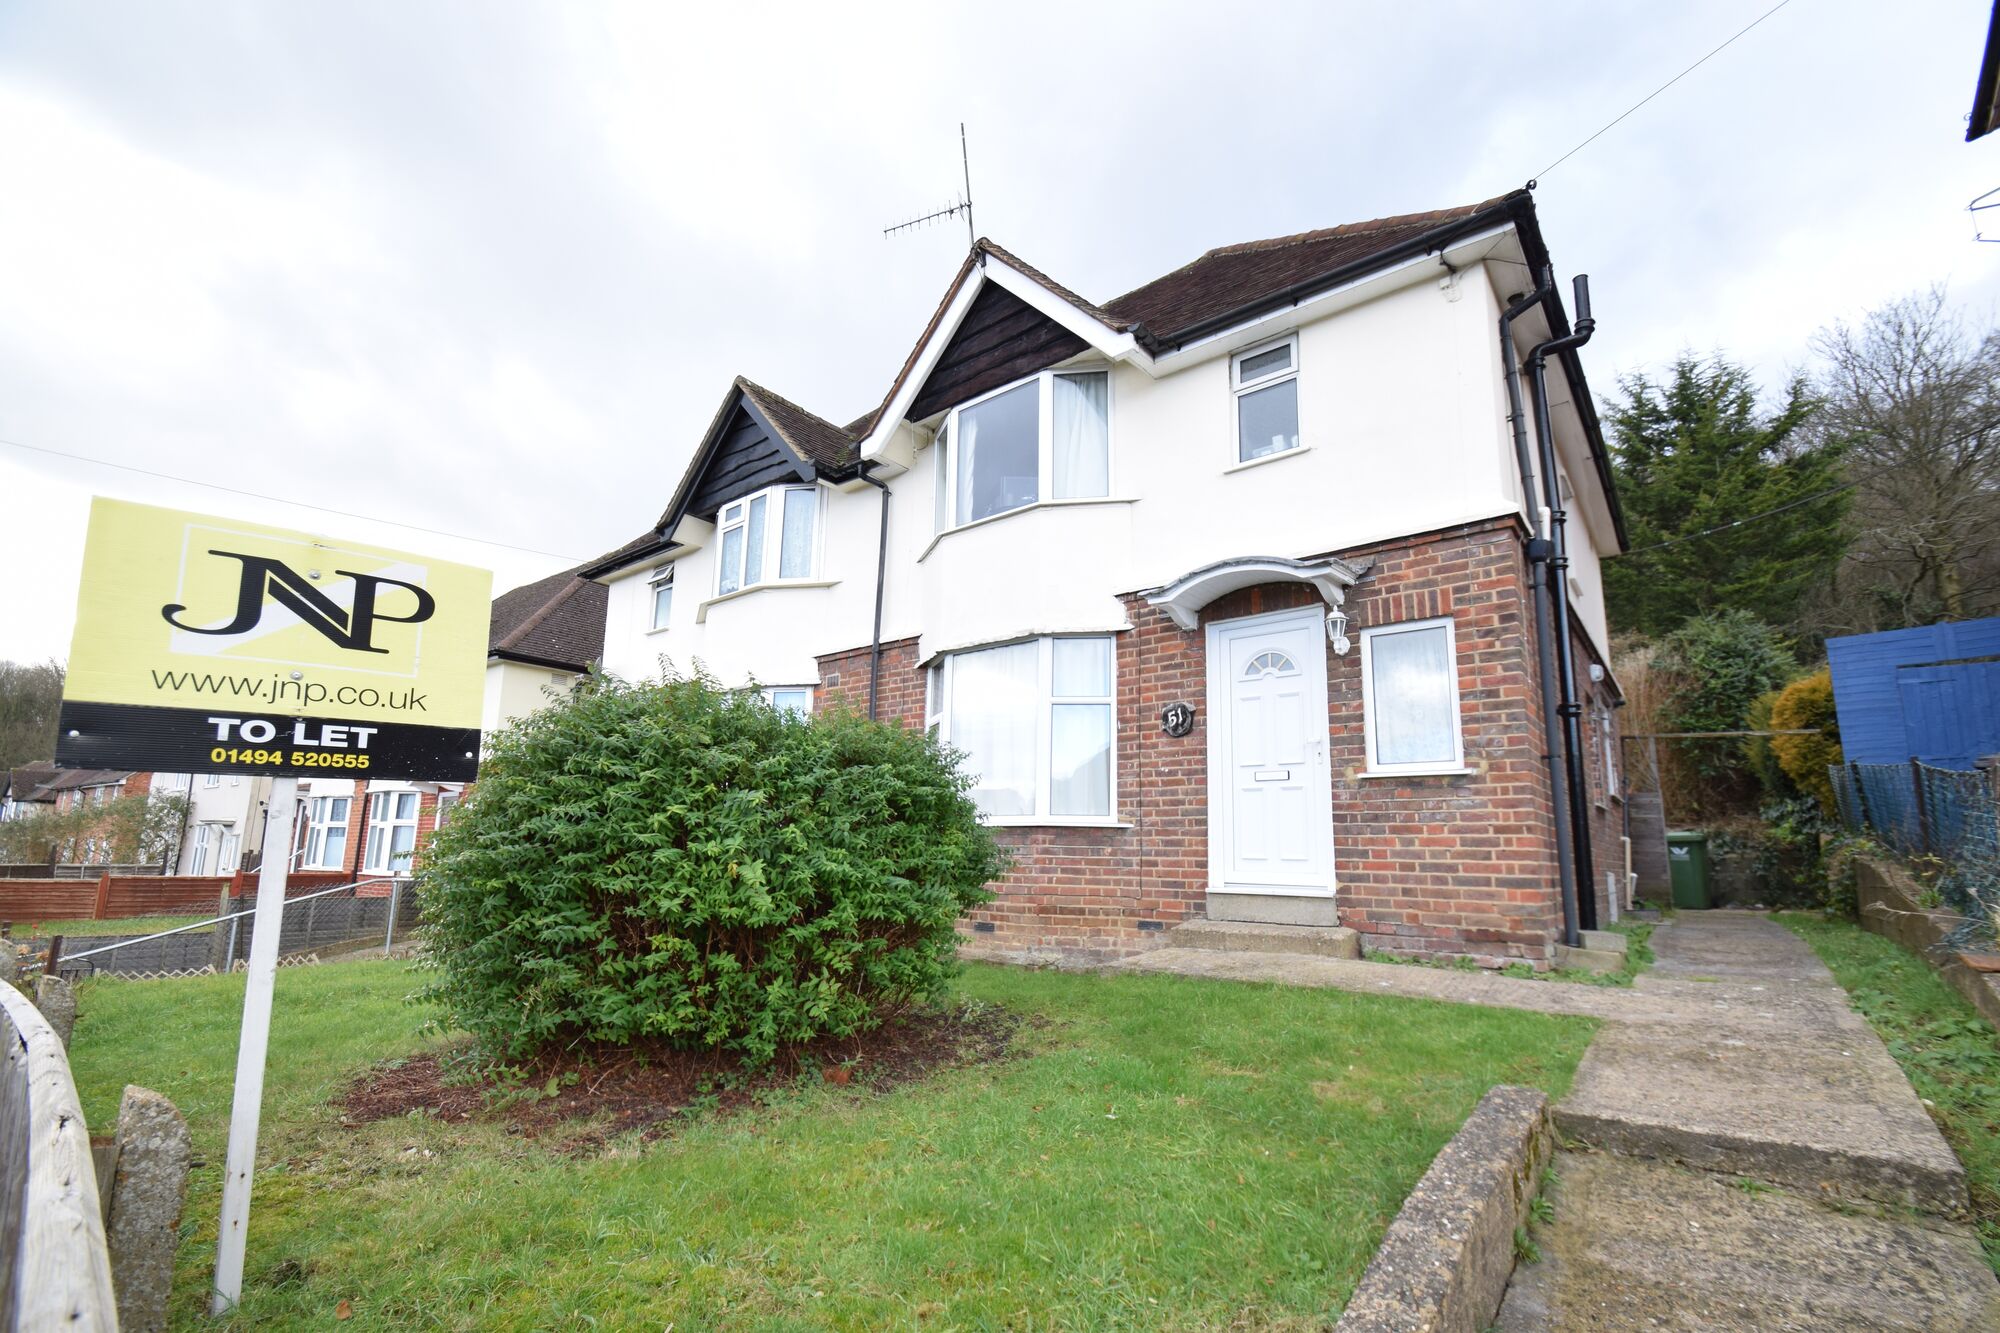 3 bedroom semi detached house to rent, Available now Underwood Road, High Wycombe, HP13, main image